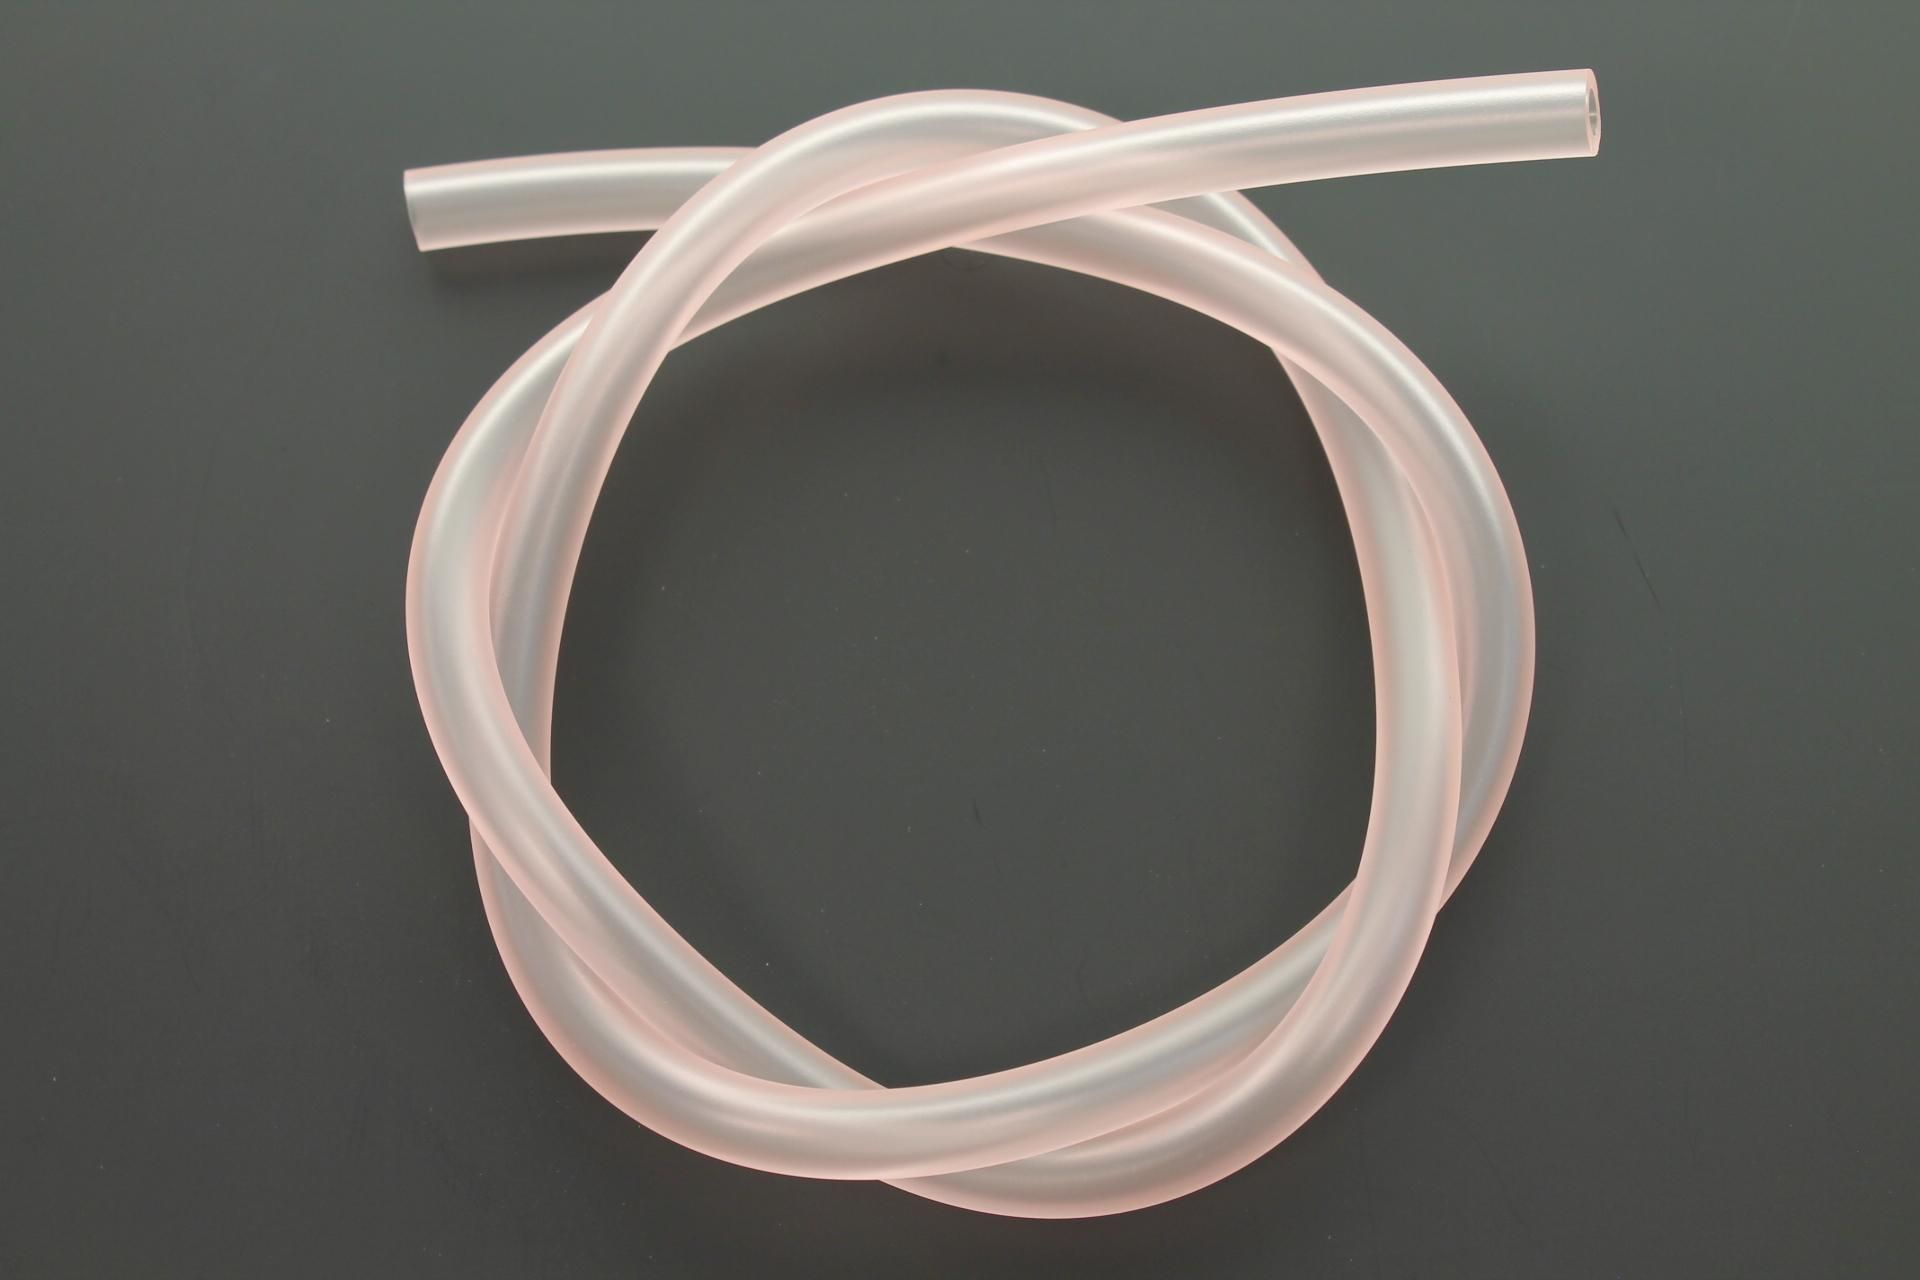 90446-09014-00 Superseded by 91A20-05080-00 - TUBE, FLEXIBLE